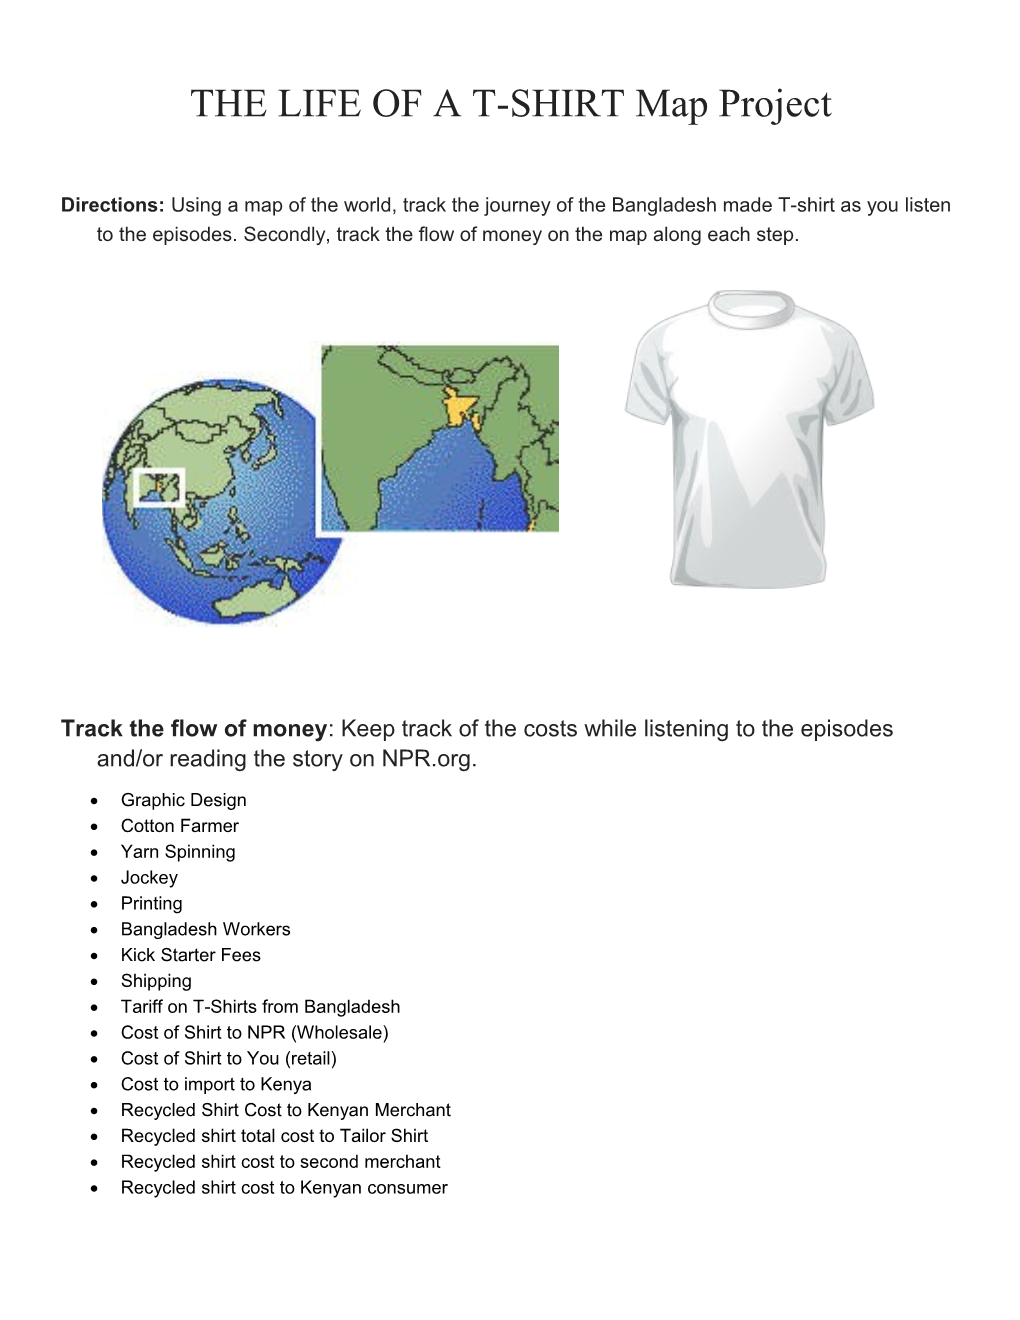 THE LIFE of a T-SHIRT Map Project